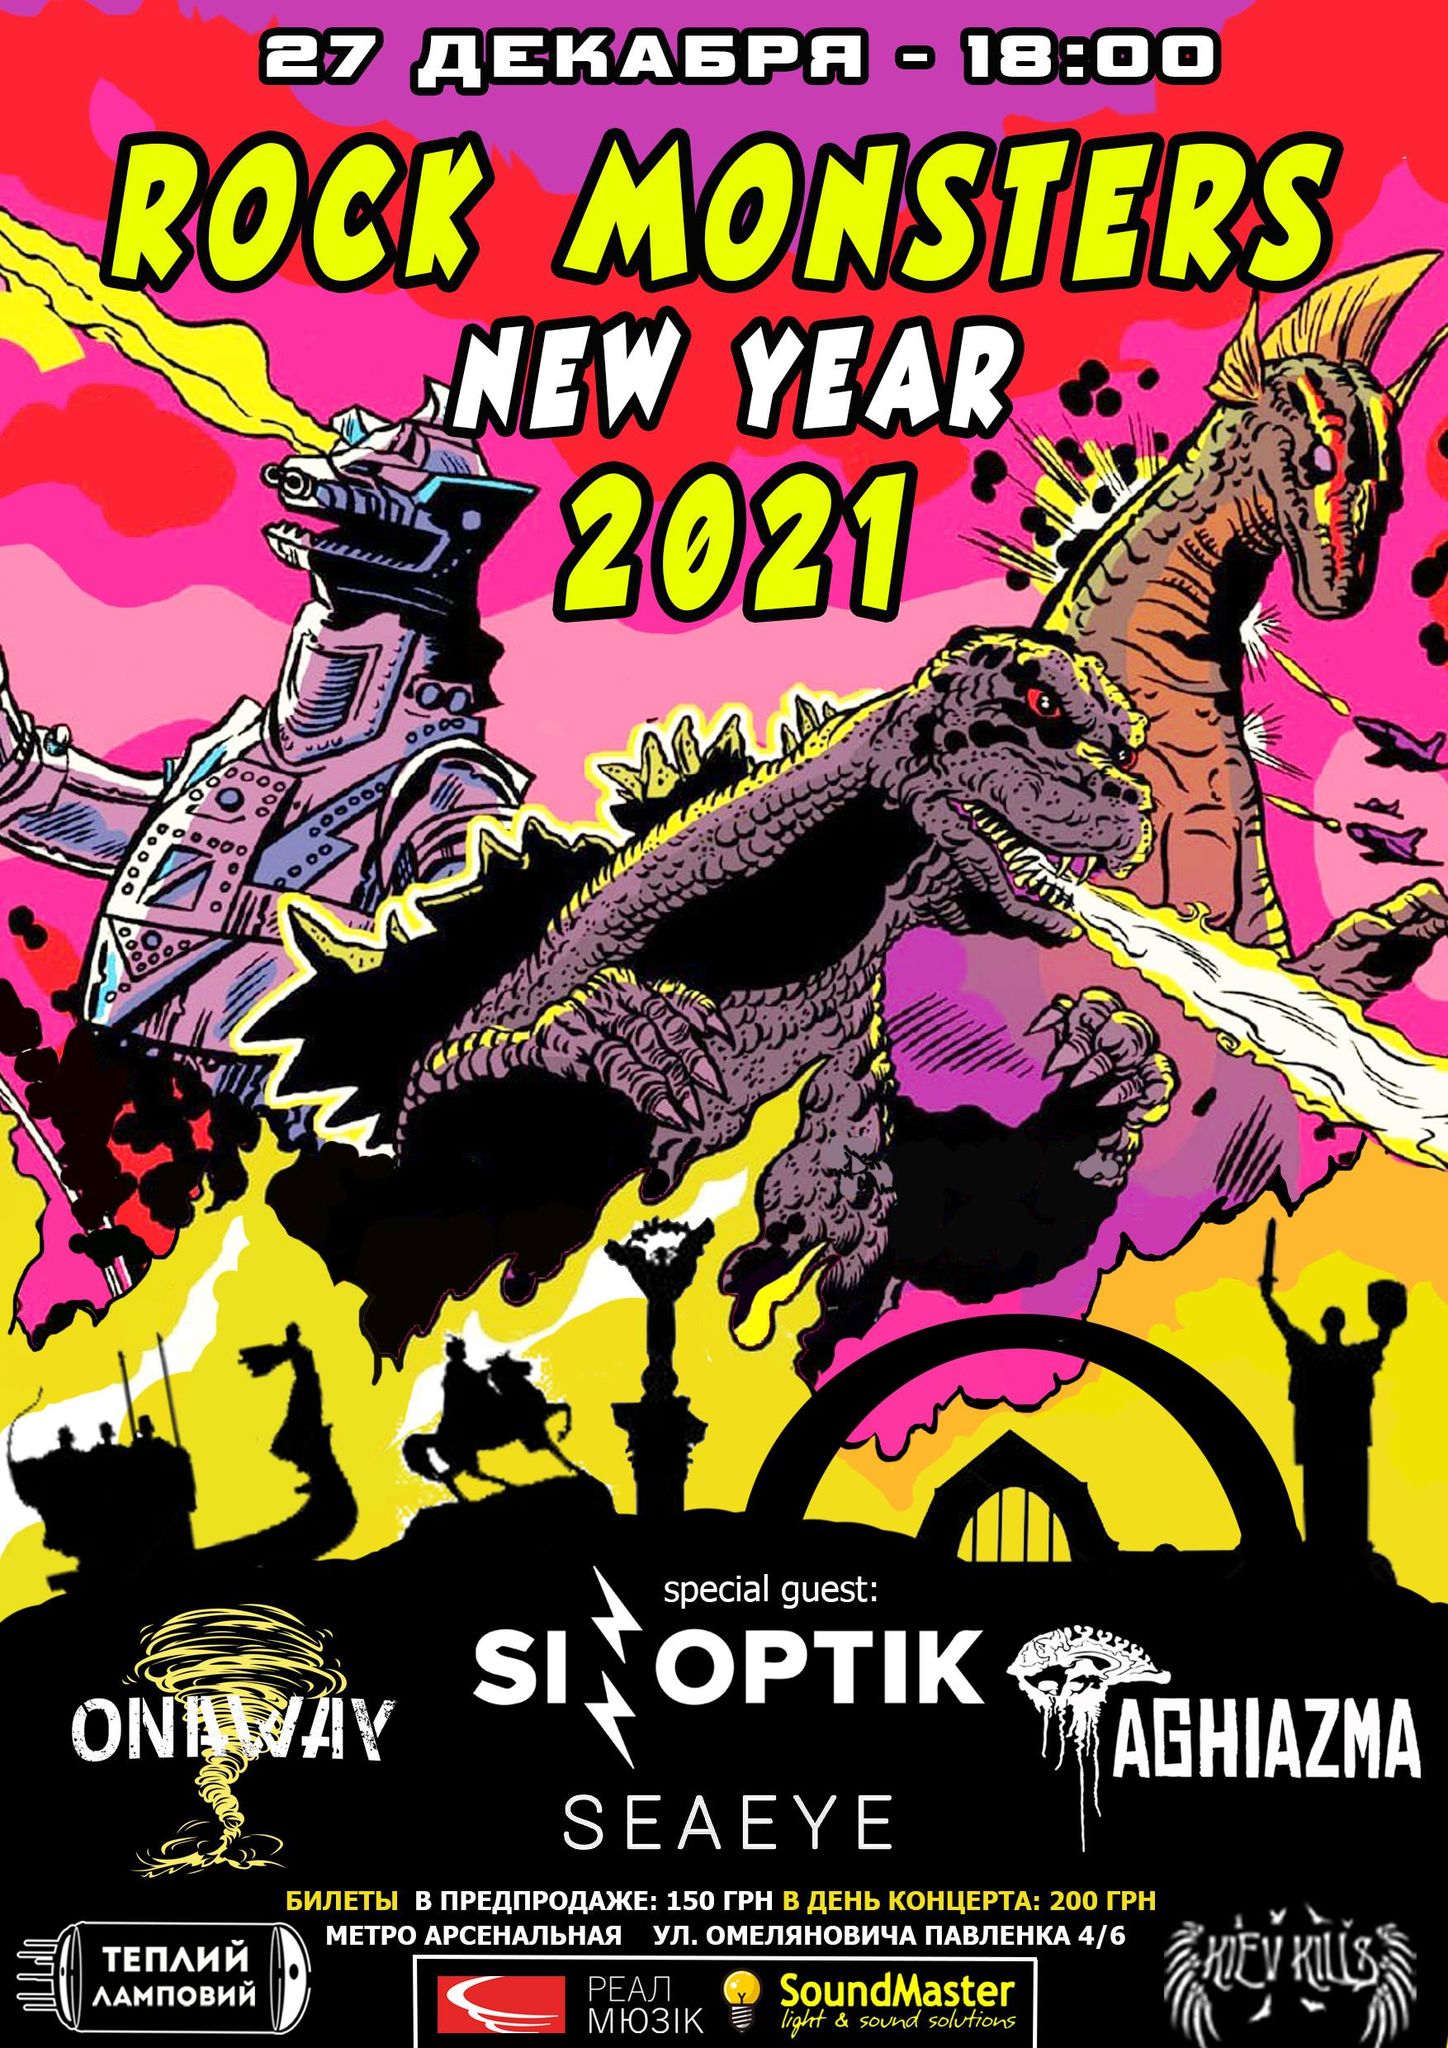 Rock Monsters New Year 2021